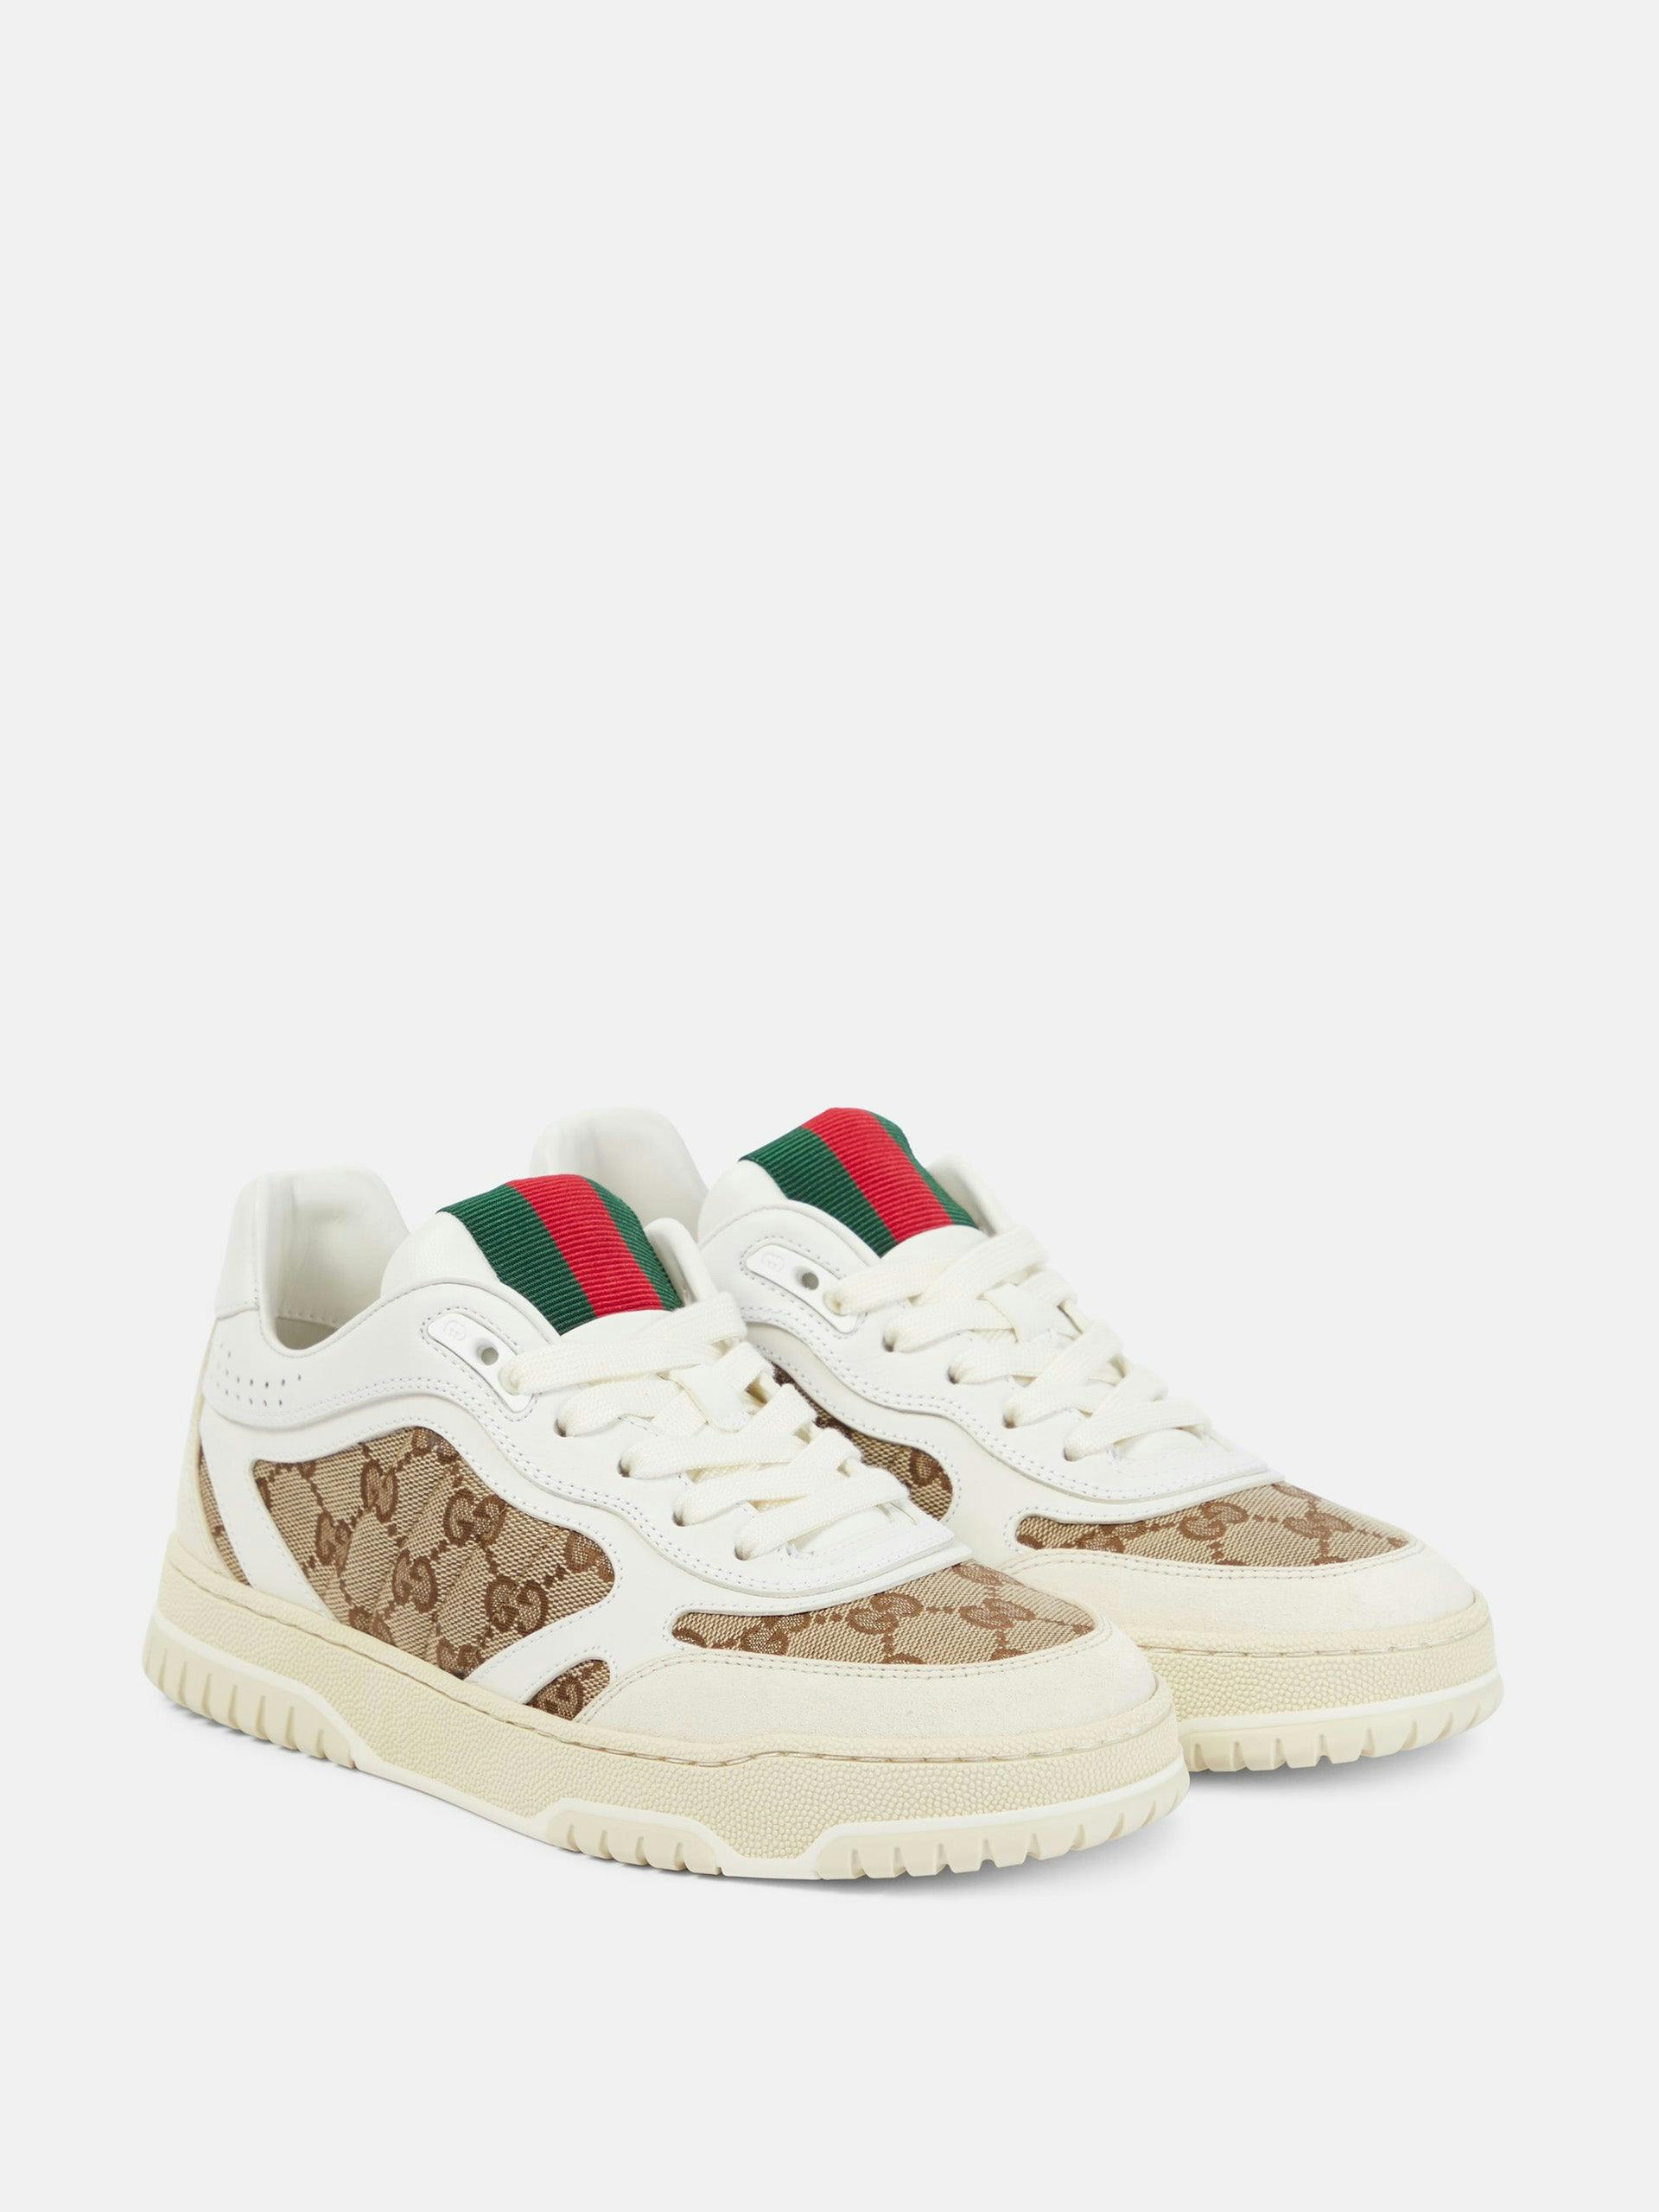 Gucci Re-Web sneakers